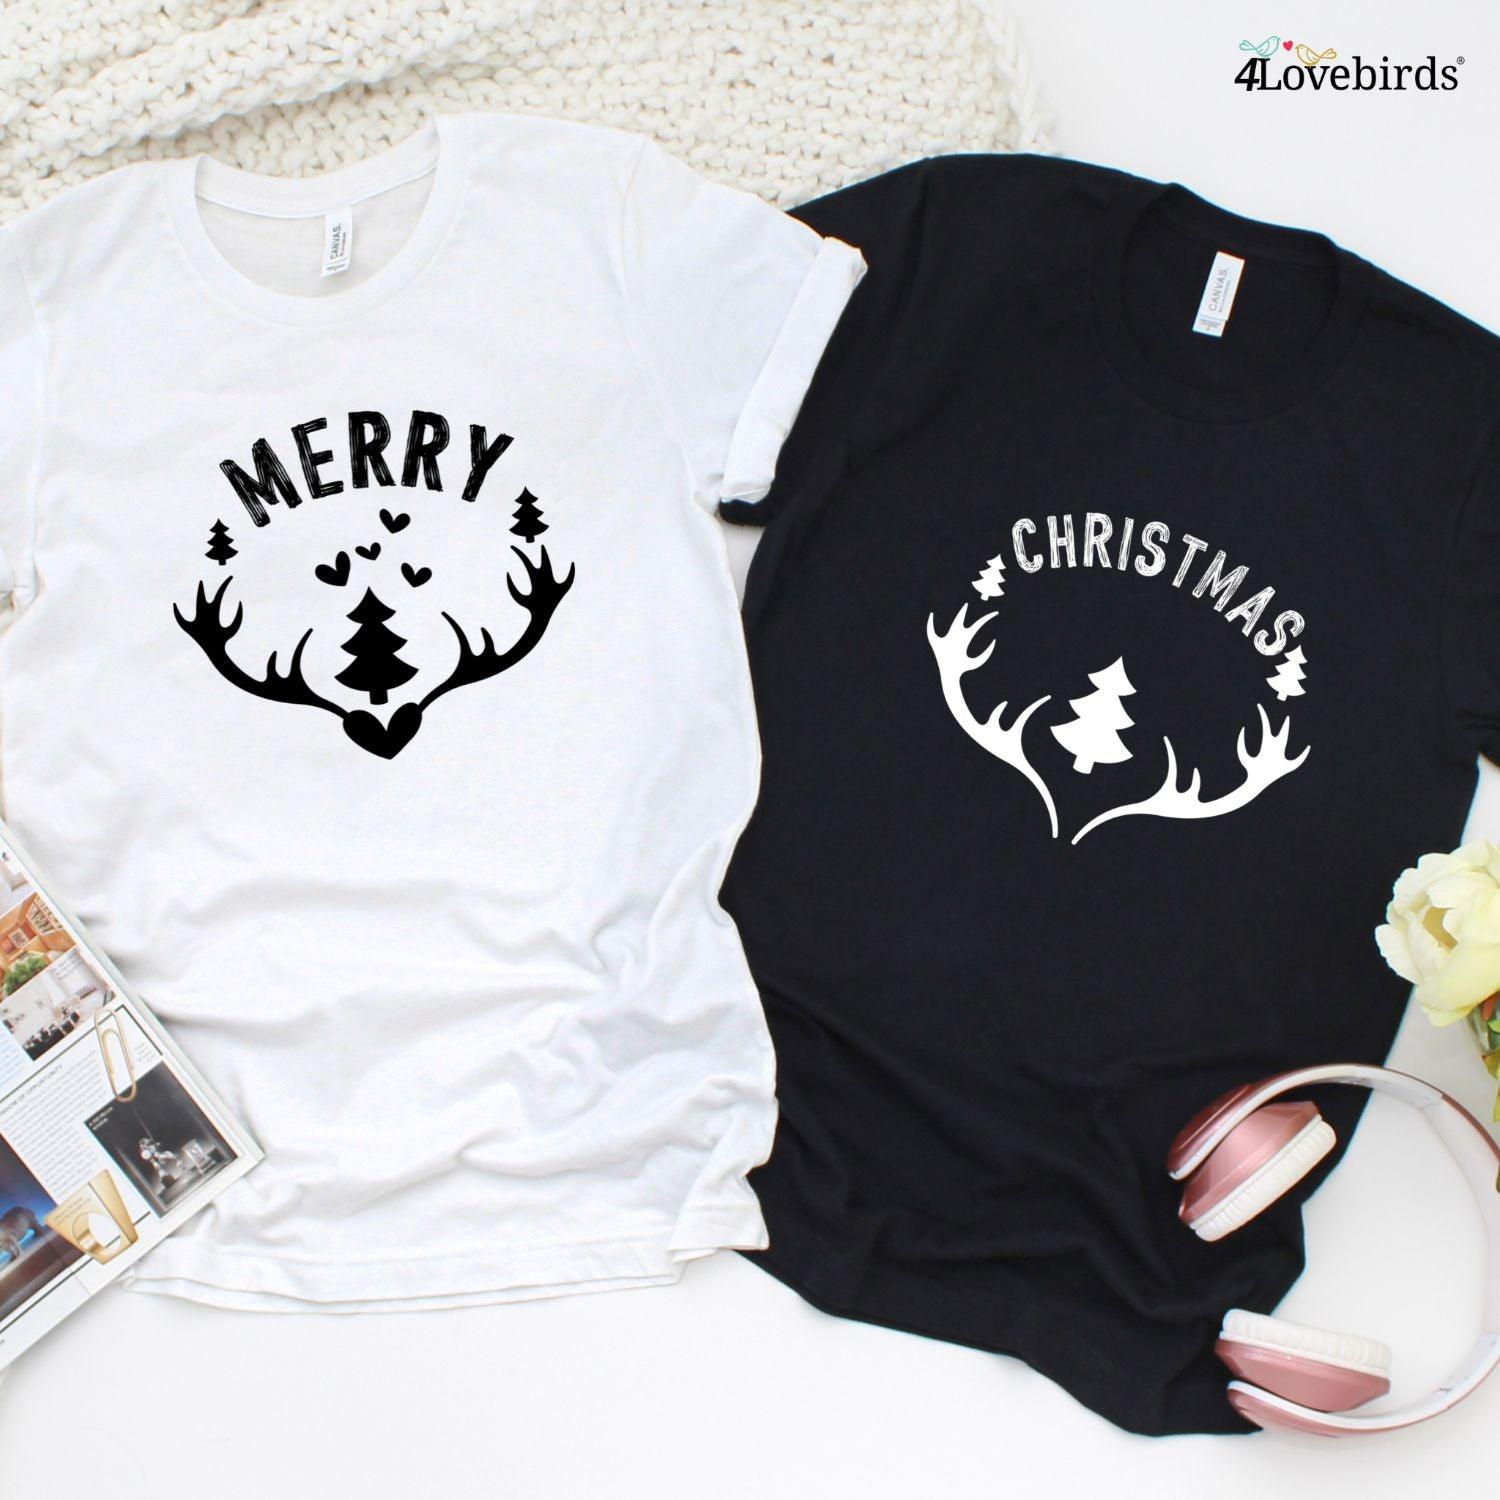 Festive 'Merry & Christmas' Couples Matching Outfits Set - Perfect Holiday Ensemble - 4Lovebirds